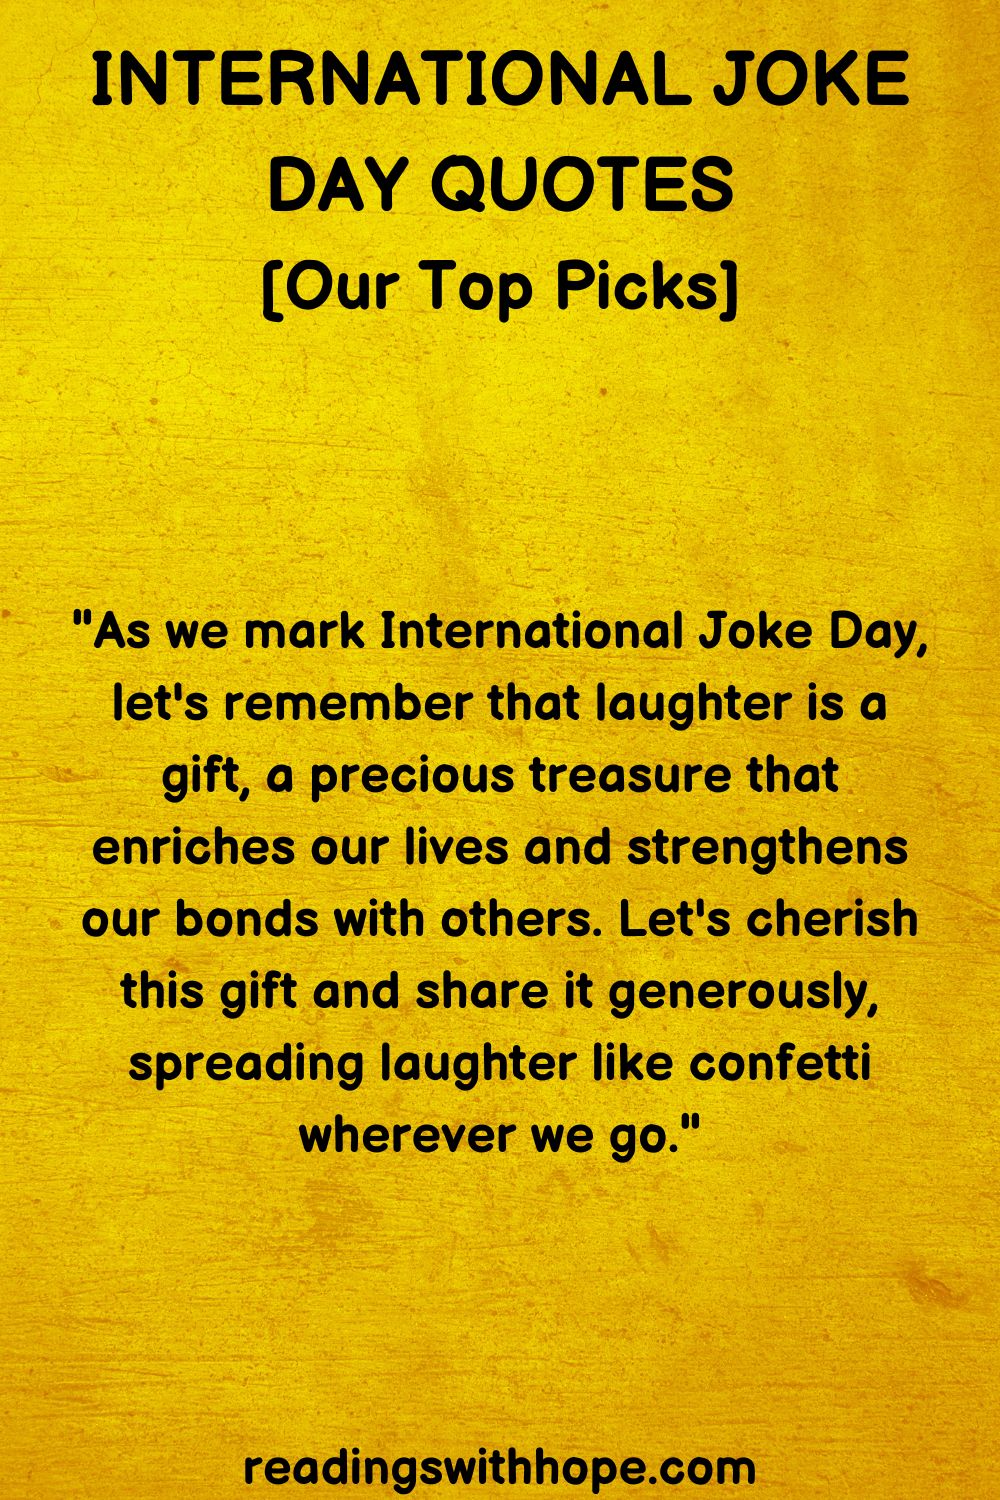 32 International Joke Day Quotes and Messages